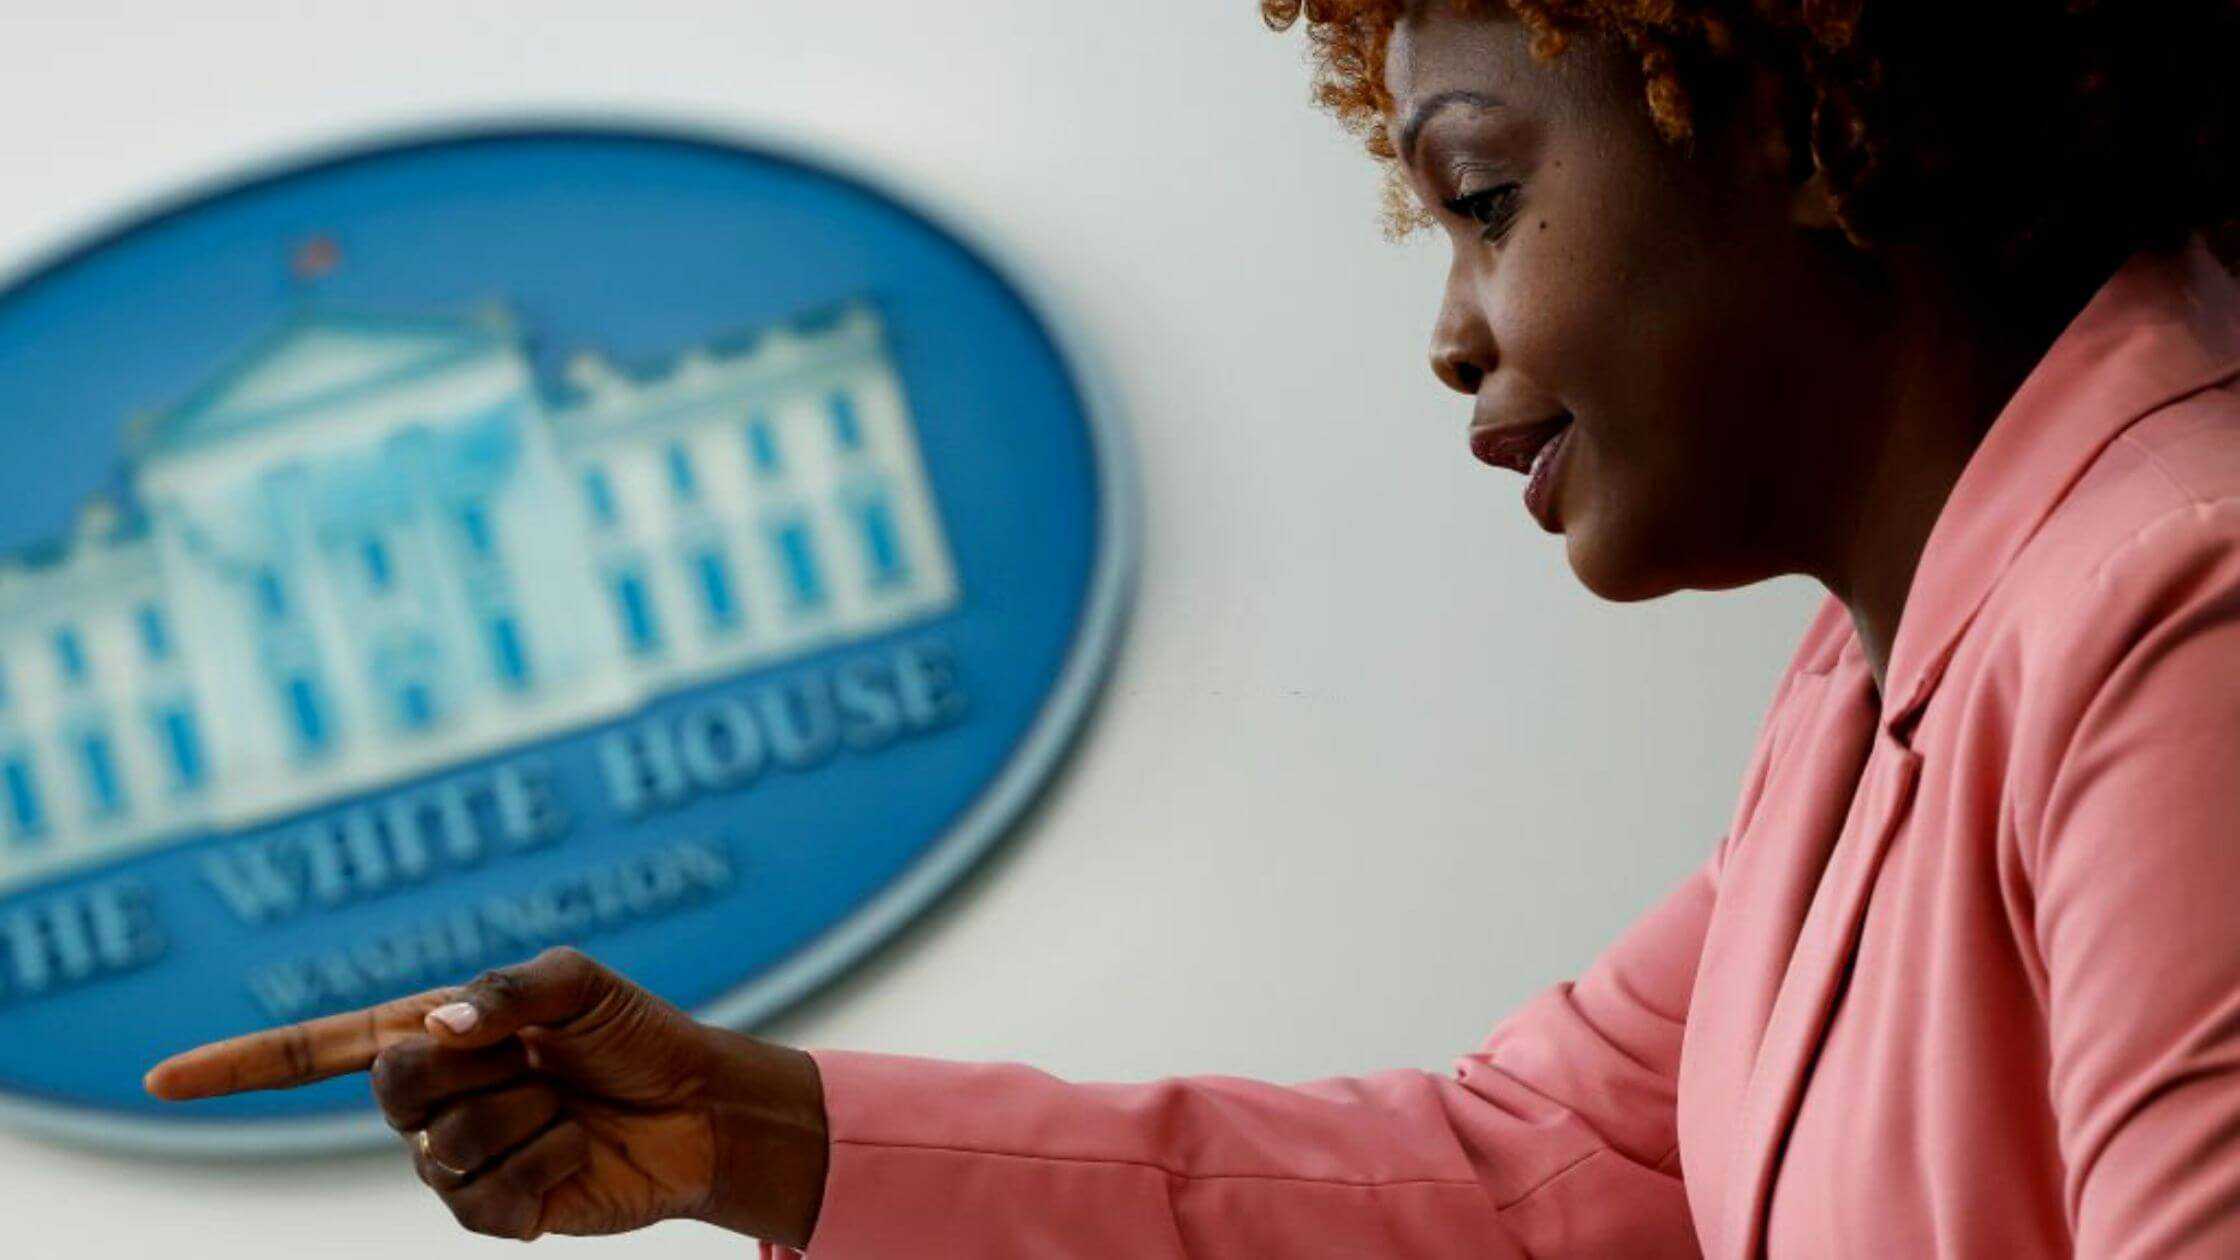 White House Press Secretary Jean-Pierre Reads The Wrong Script During A Briefing